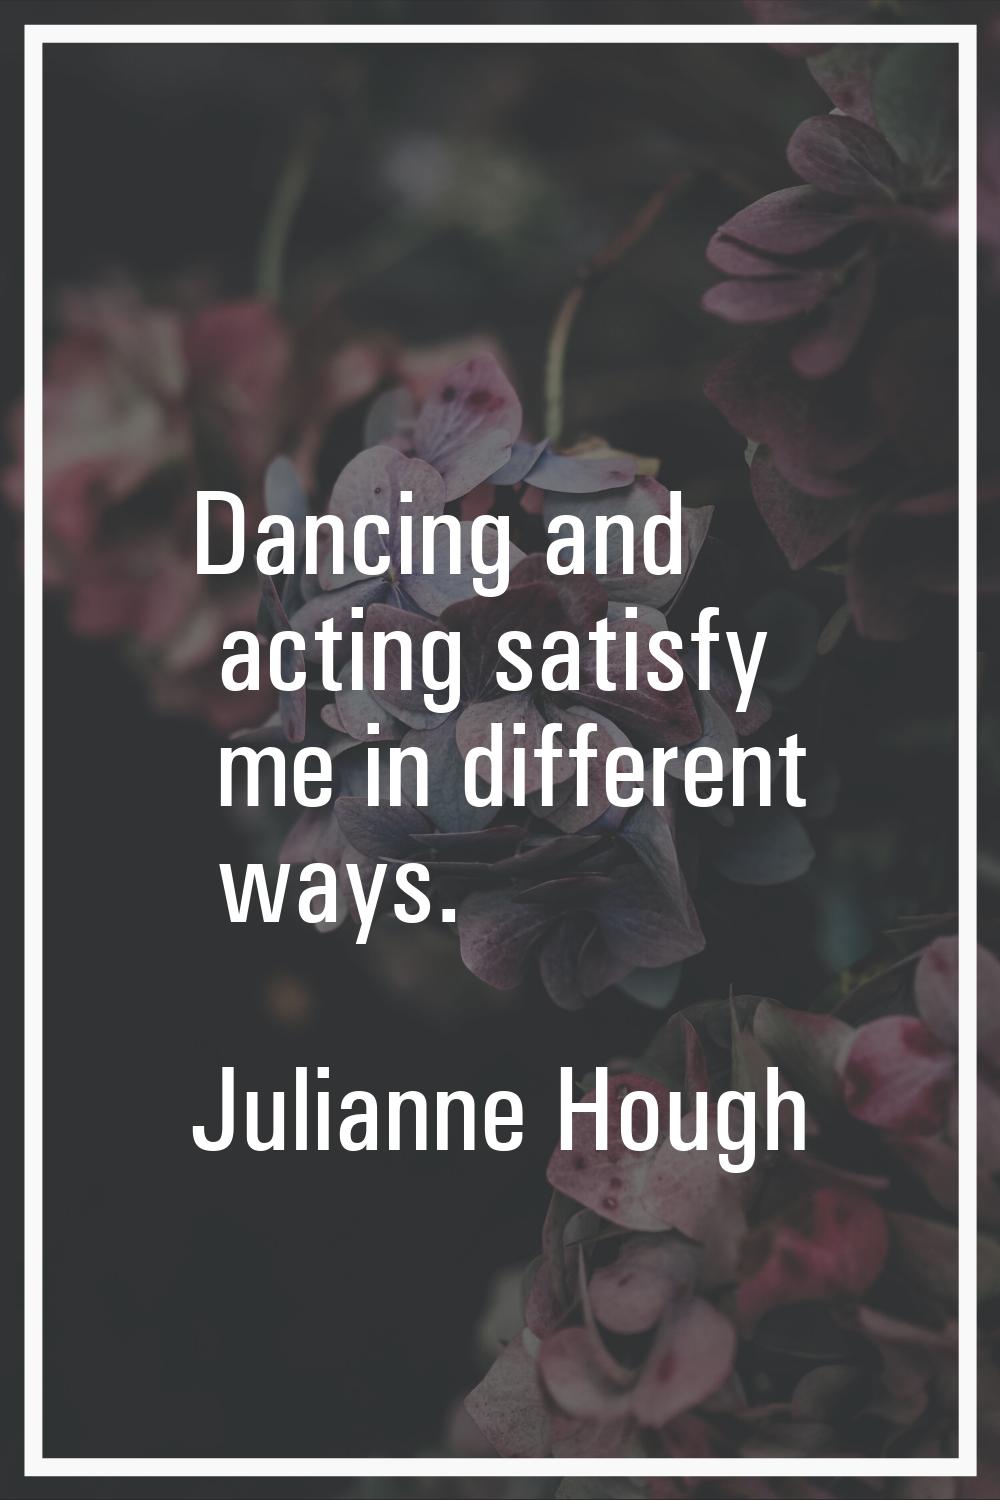 Dancing and acting satisfy me in different ways.